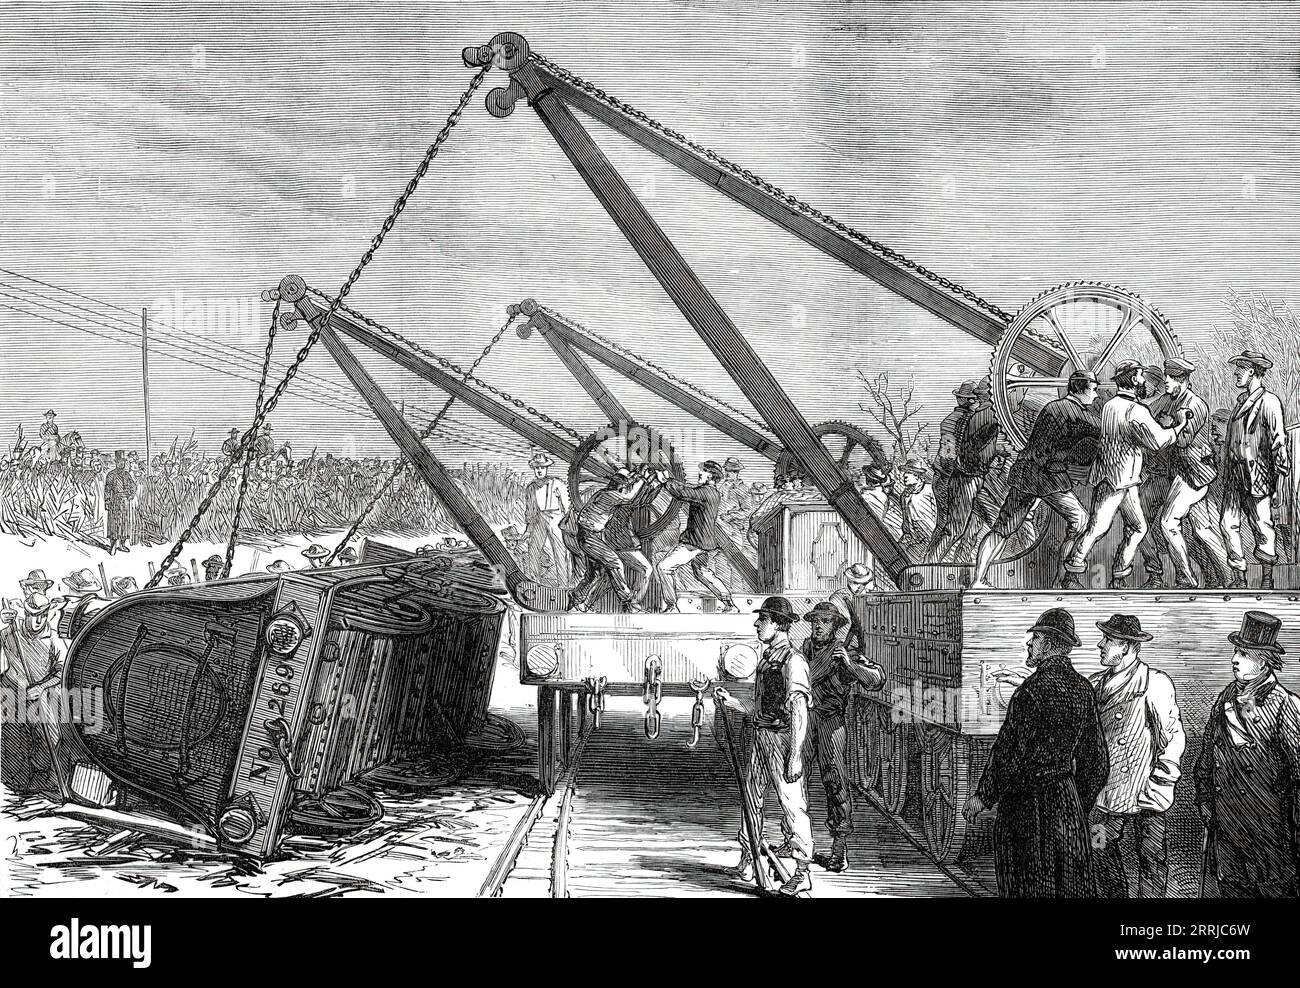 The Railway Accident at Abbotts Ripton, Huntingdon: raising an engine from the wrecked train, 1876. On 21 January 1876, the Edinburgh-London Special Scotch Express was involved in a collision, during a blizzard, with a coal train on the Great Northern Railway main line. A second collision occurred minutes later when an express to Leeds crashed into the wreckage obstructing the northbound line. Thirteen passengers died, and 53 passengers and 6 traincrew members were injured. Factors included signal failure, bad weather and poor visibility. Snow and ice on the wires by which the semaphore arm sh Stock Photo